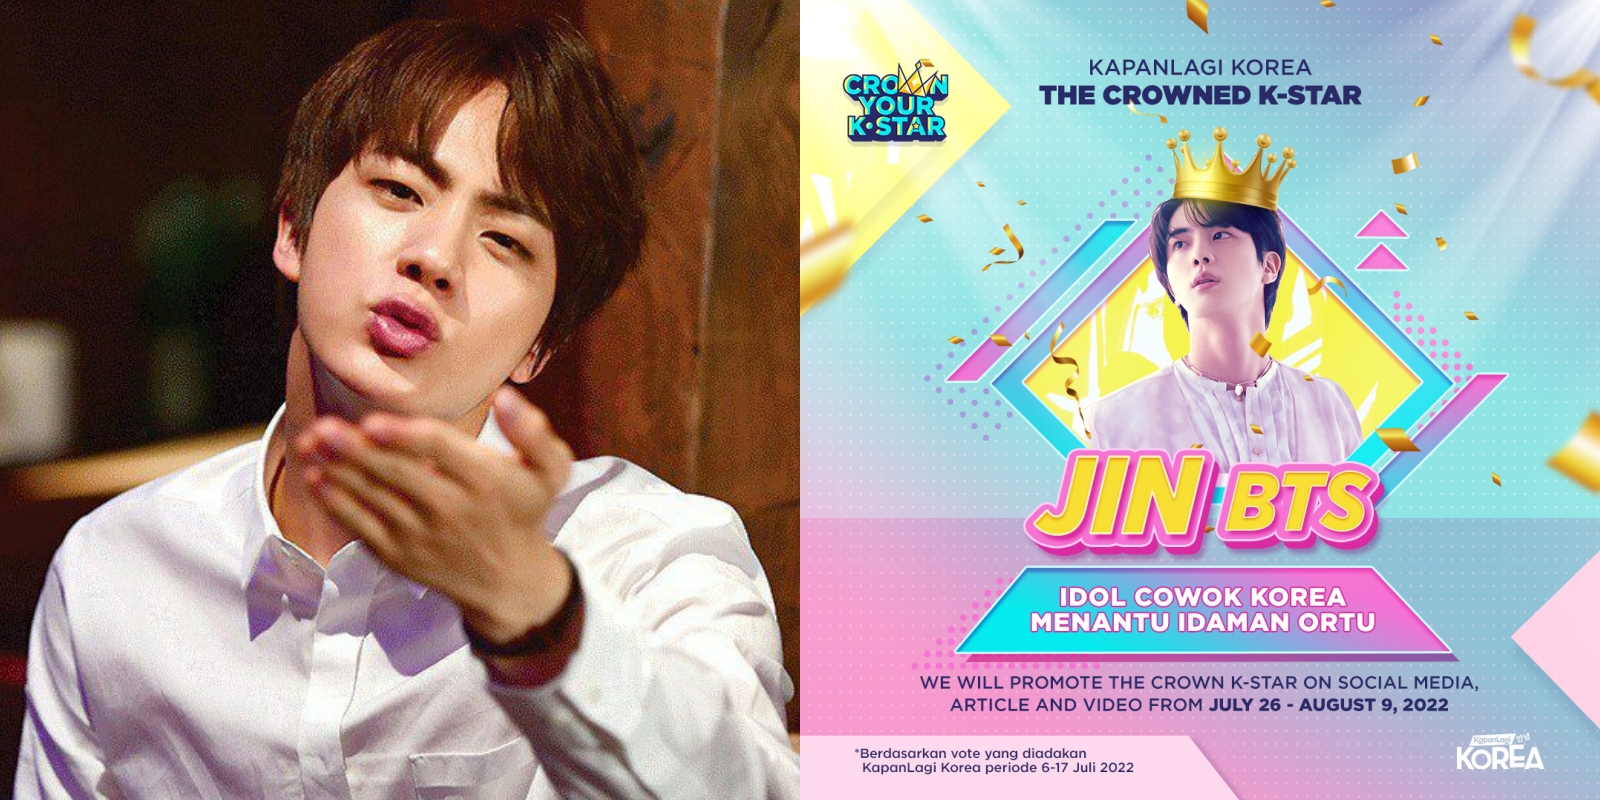 [FEATURED CONTENT] 10 Viral Nicknames of BTS Jin, Any Appearance Proof Will Make You Fall in Love